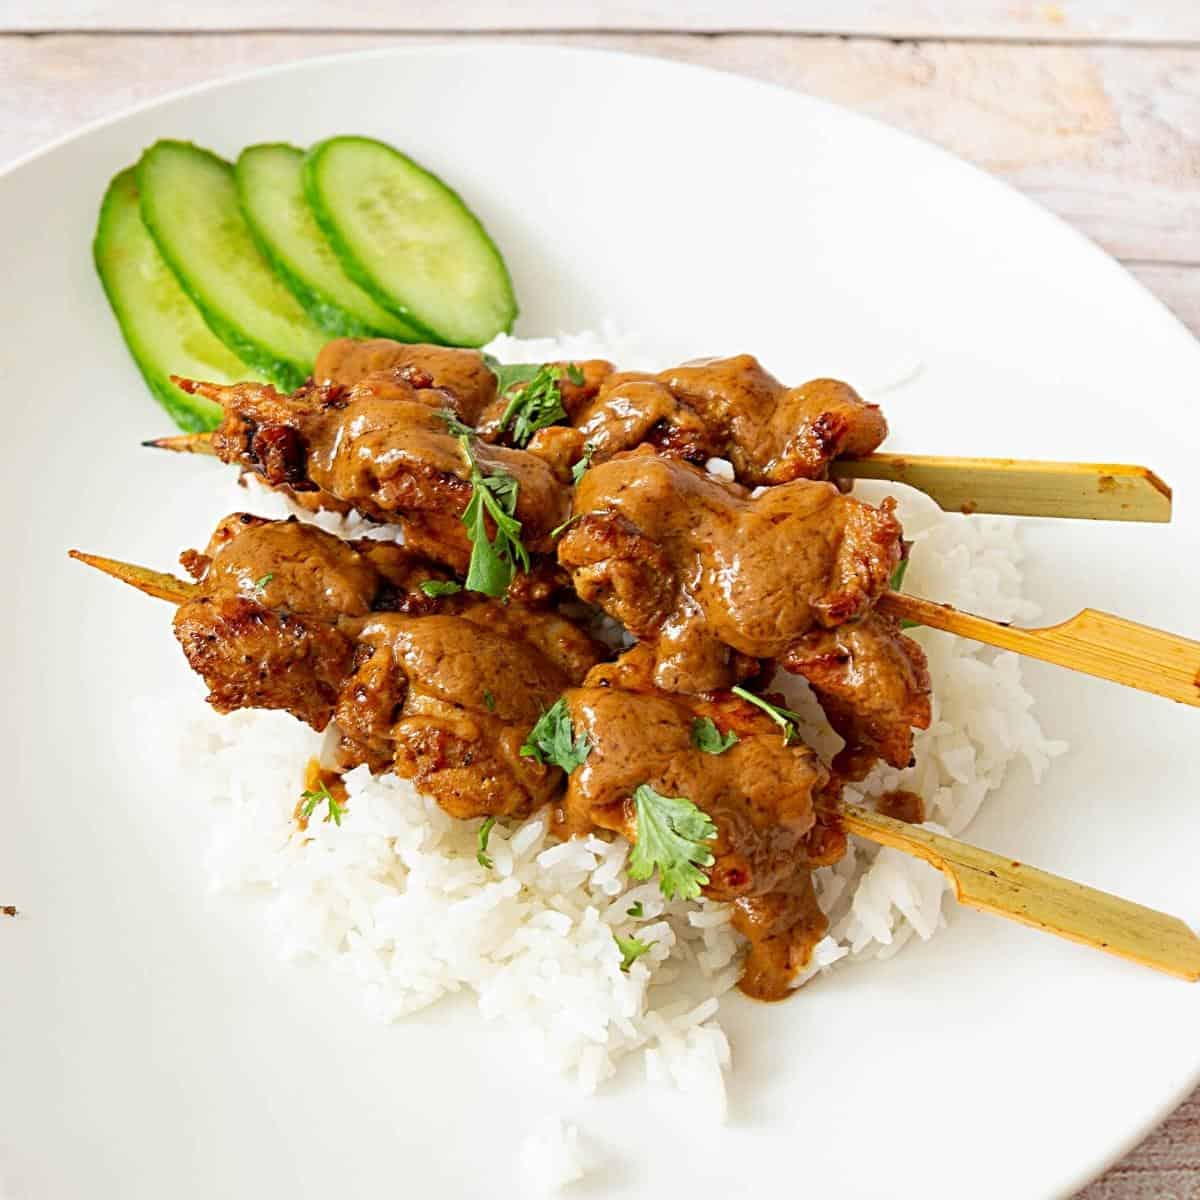 Satay skewers served with white rice.